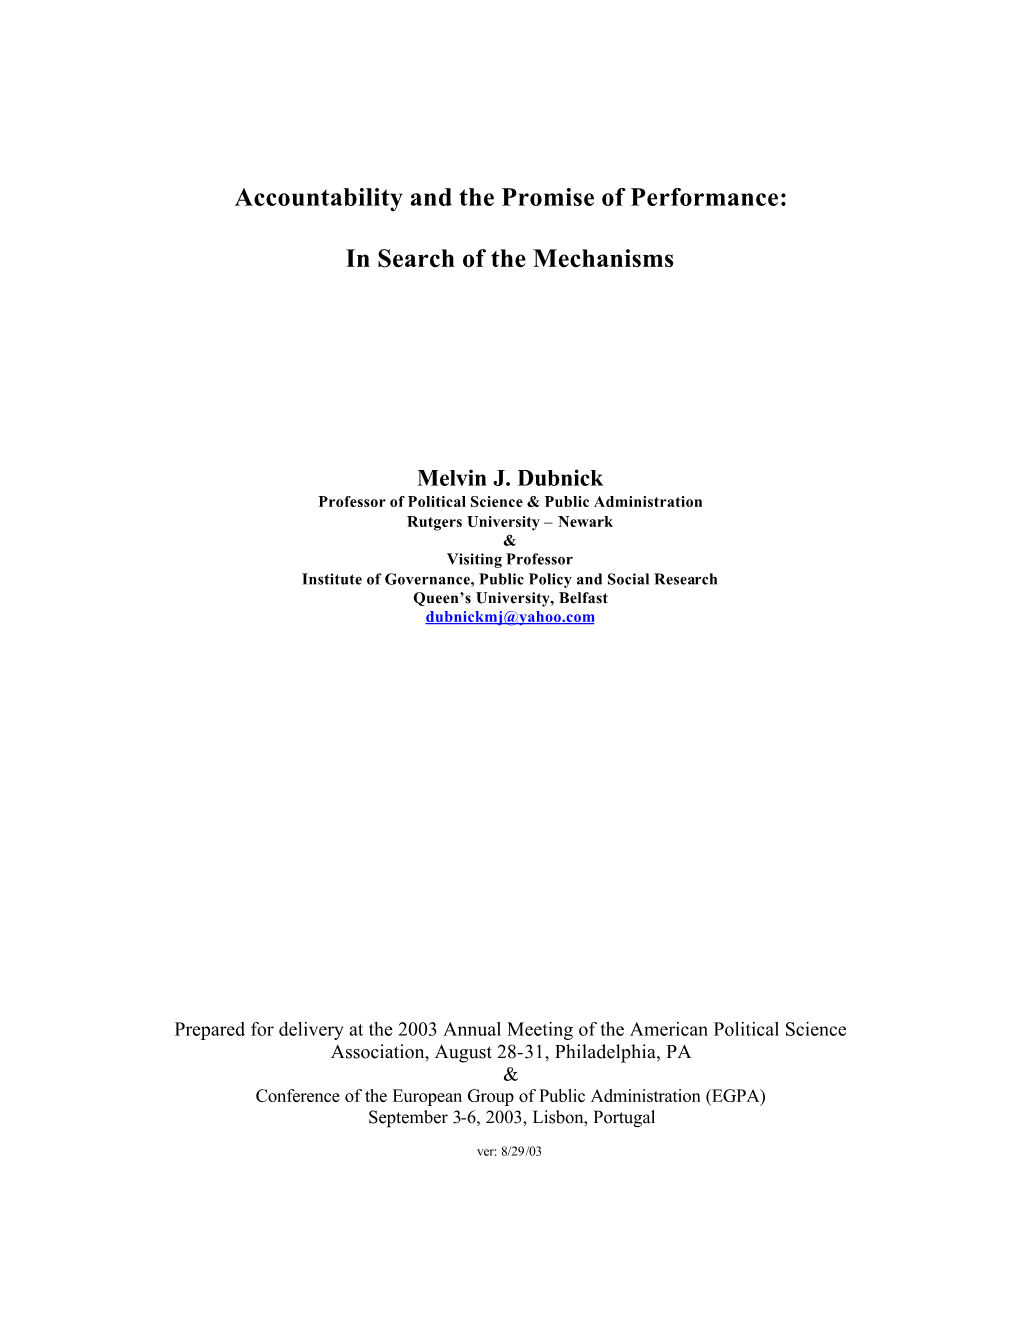 Accountability and the Promise of Performance: in Search of The